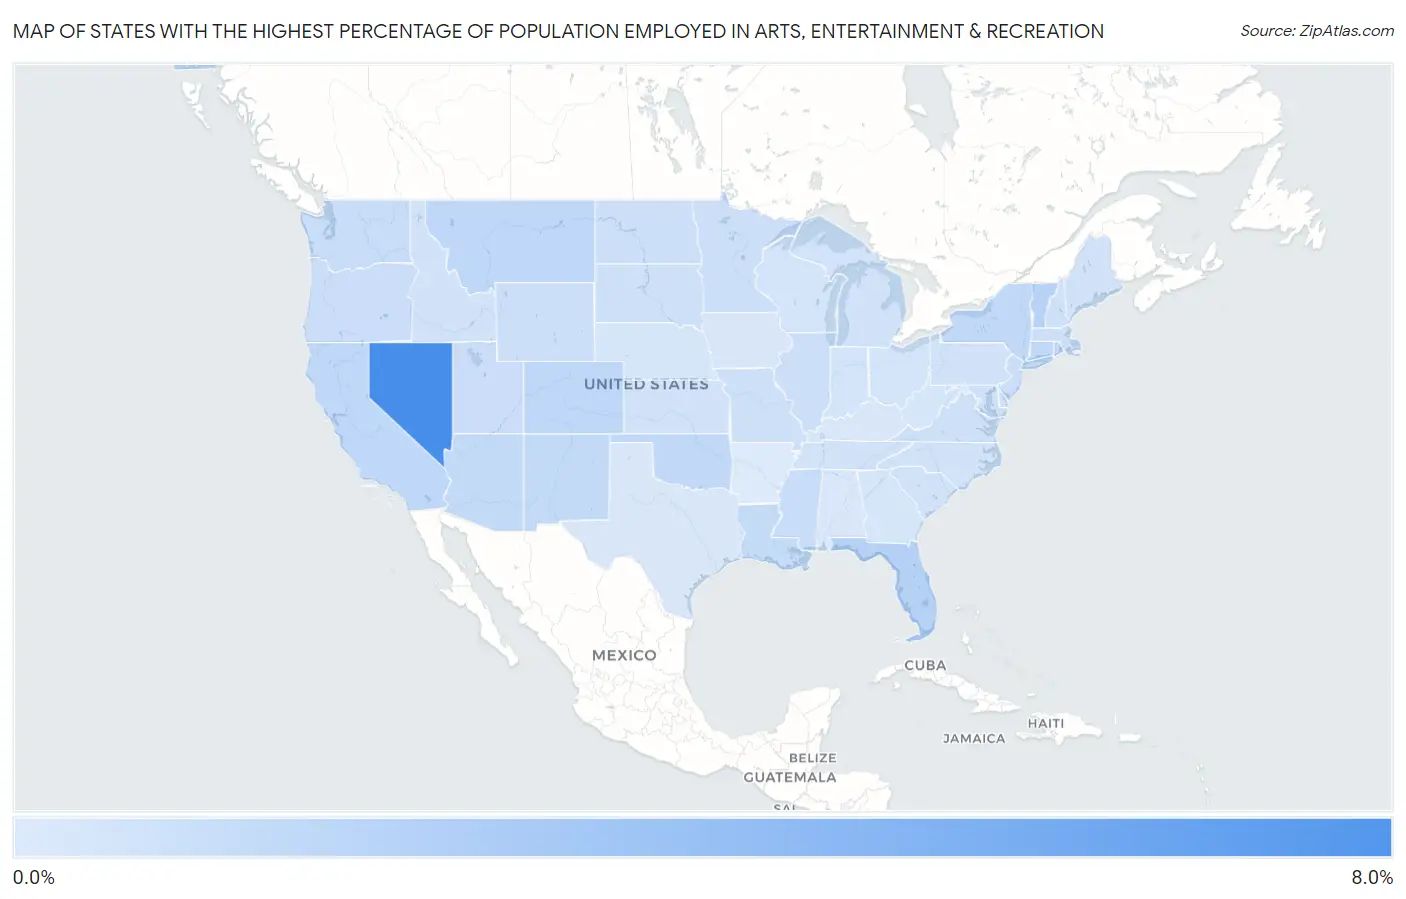 States with the Highest Percentage of Population Employed in Arts, Entertainment & Recreation in the United States Map